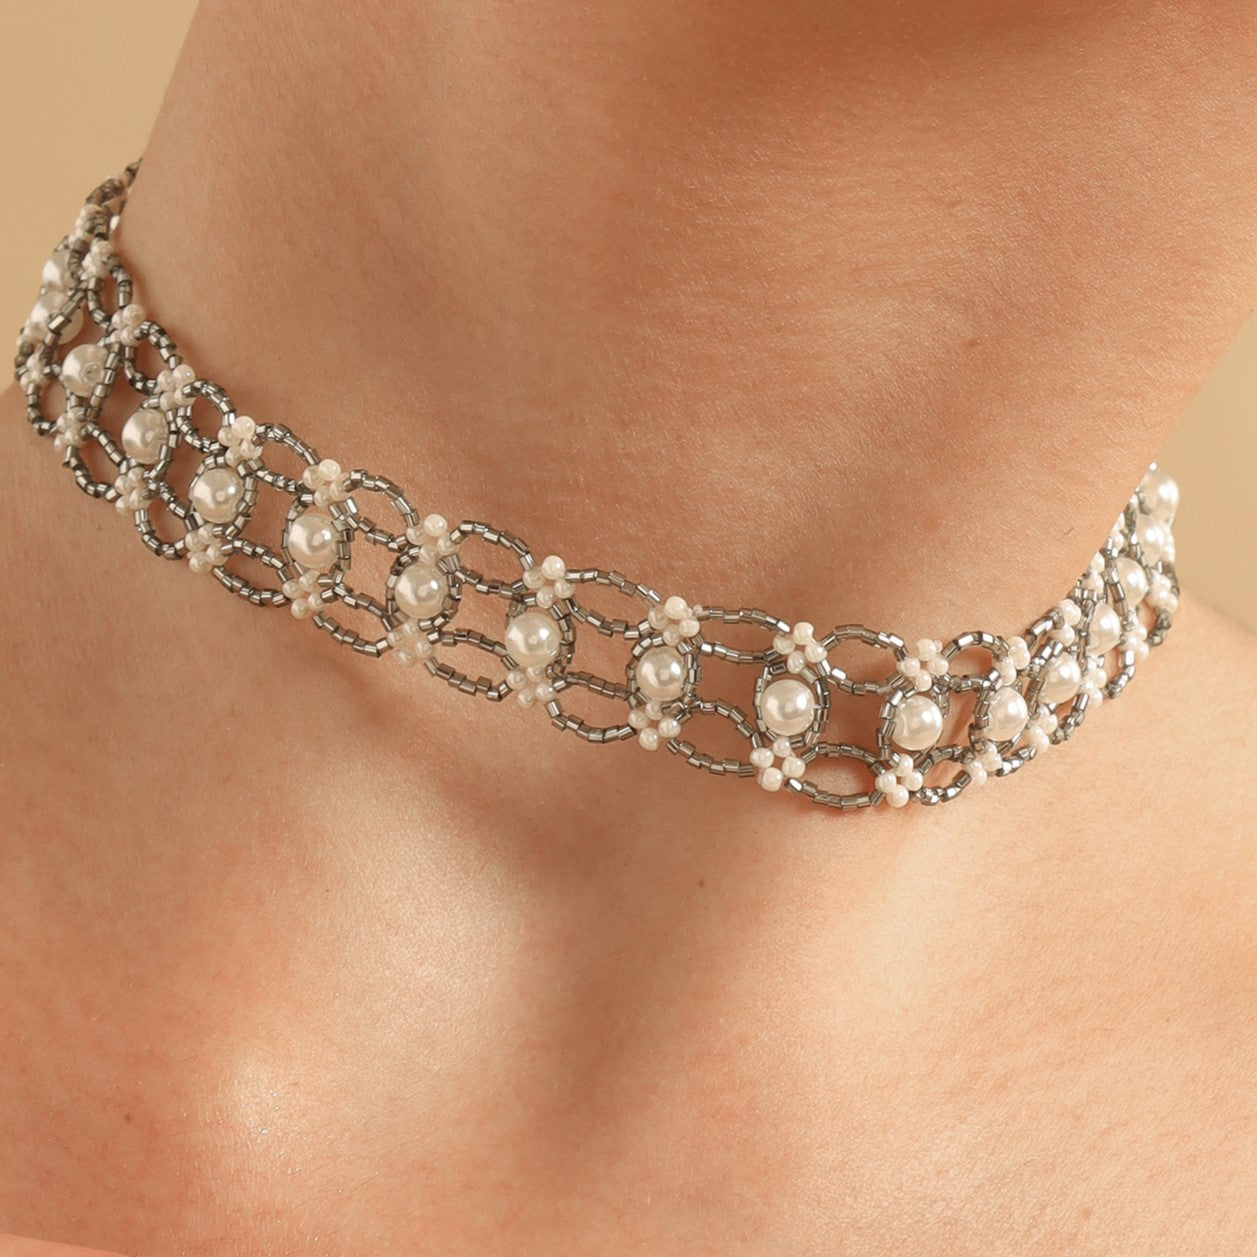 Buy Pearl Choker Necklace Sets Online - Premium Quality